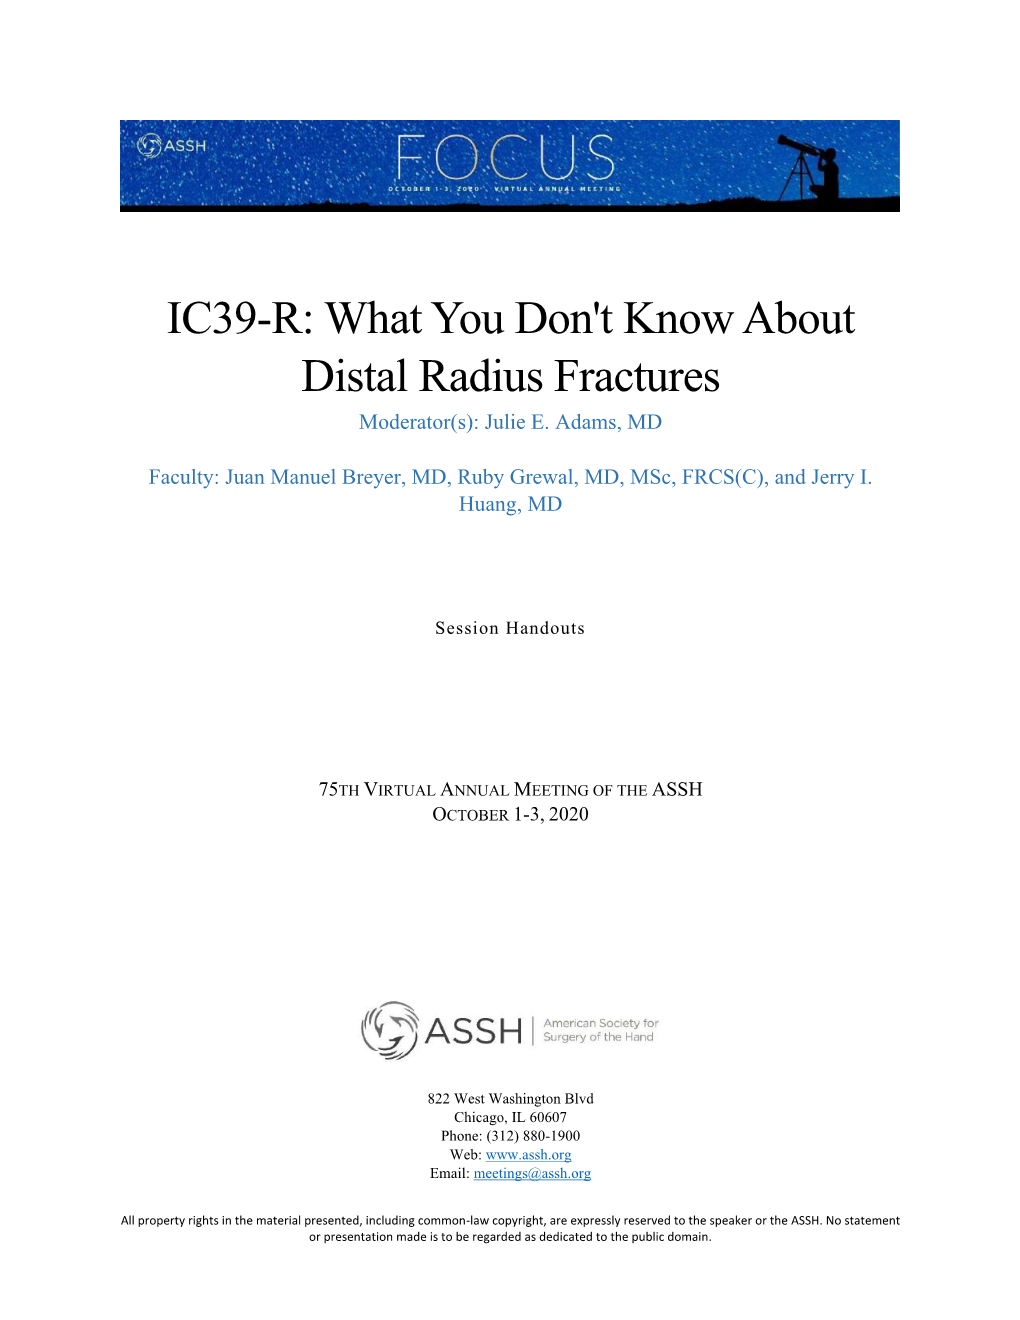 IC39-R: What You Don't Know About Distal Radius Fractures